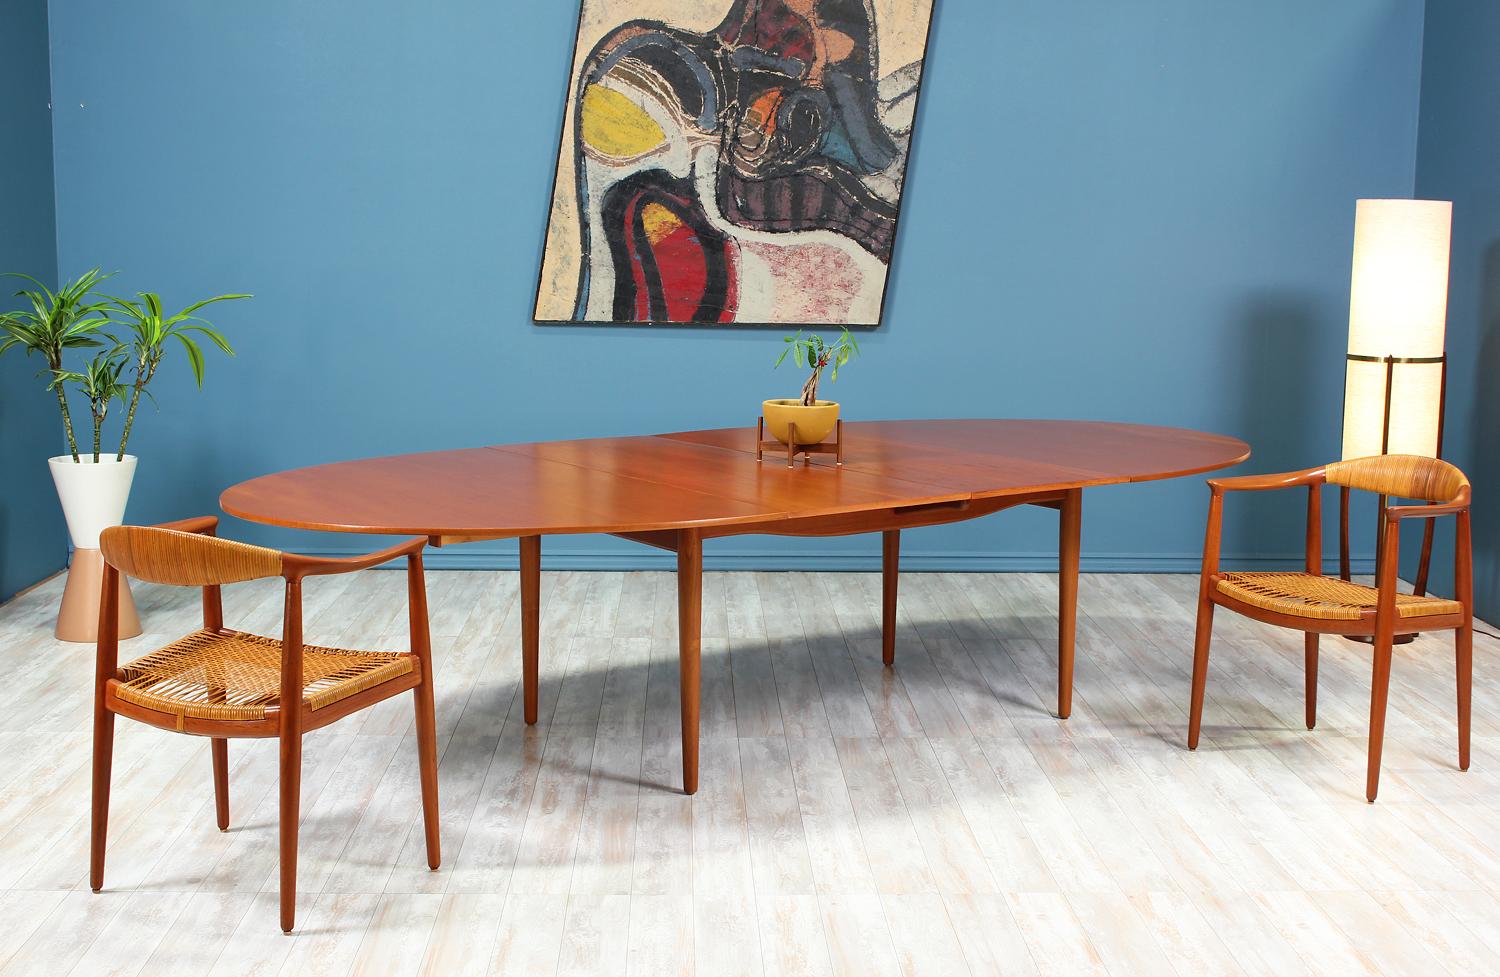 Rare “Judas” dining table designed by Finn Juhl for Baker Furniture Co. in the United States circa 1950’s. This unique design features an oval expandable top with removable leaves allowing more table space when needed. This Baker version, with its